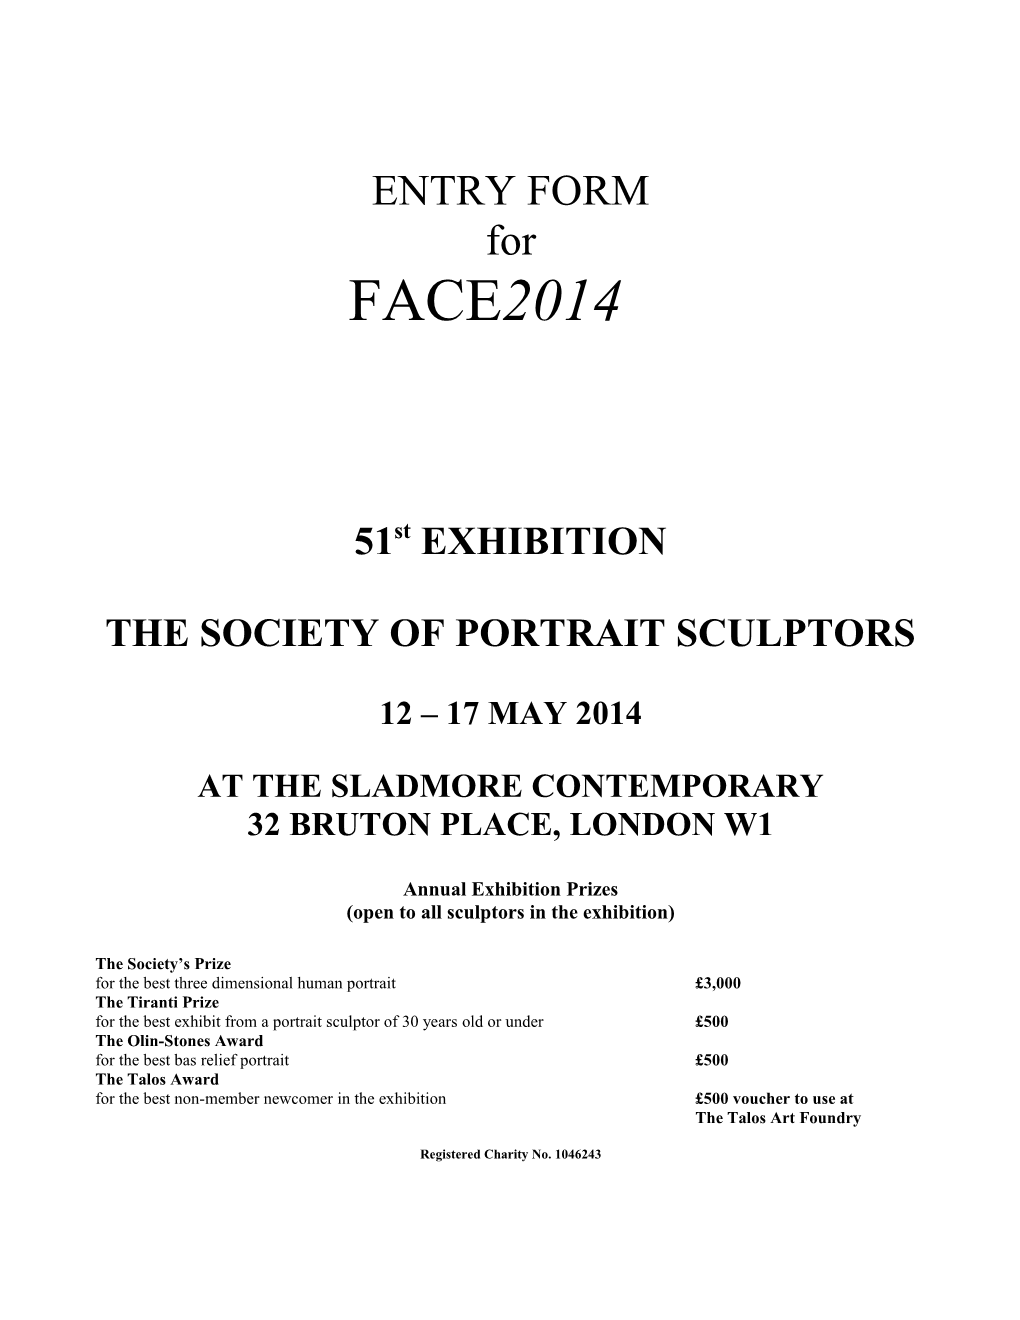 The Society of Portrait Sculptors